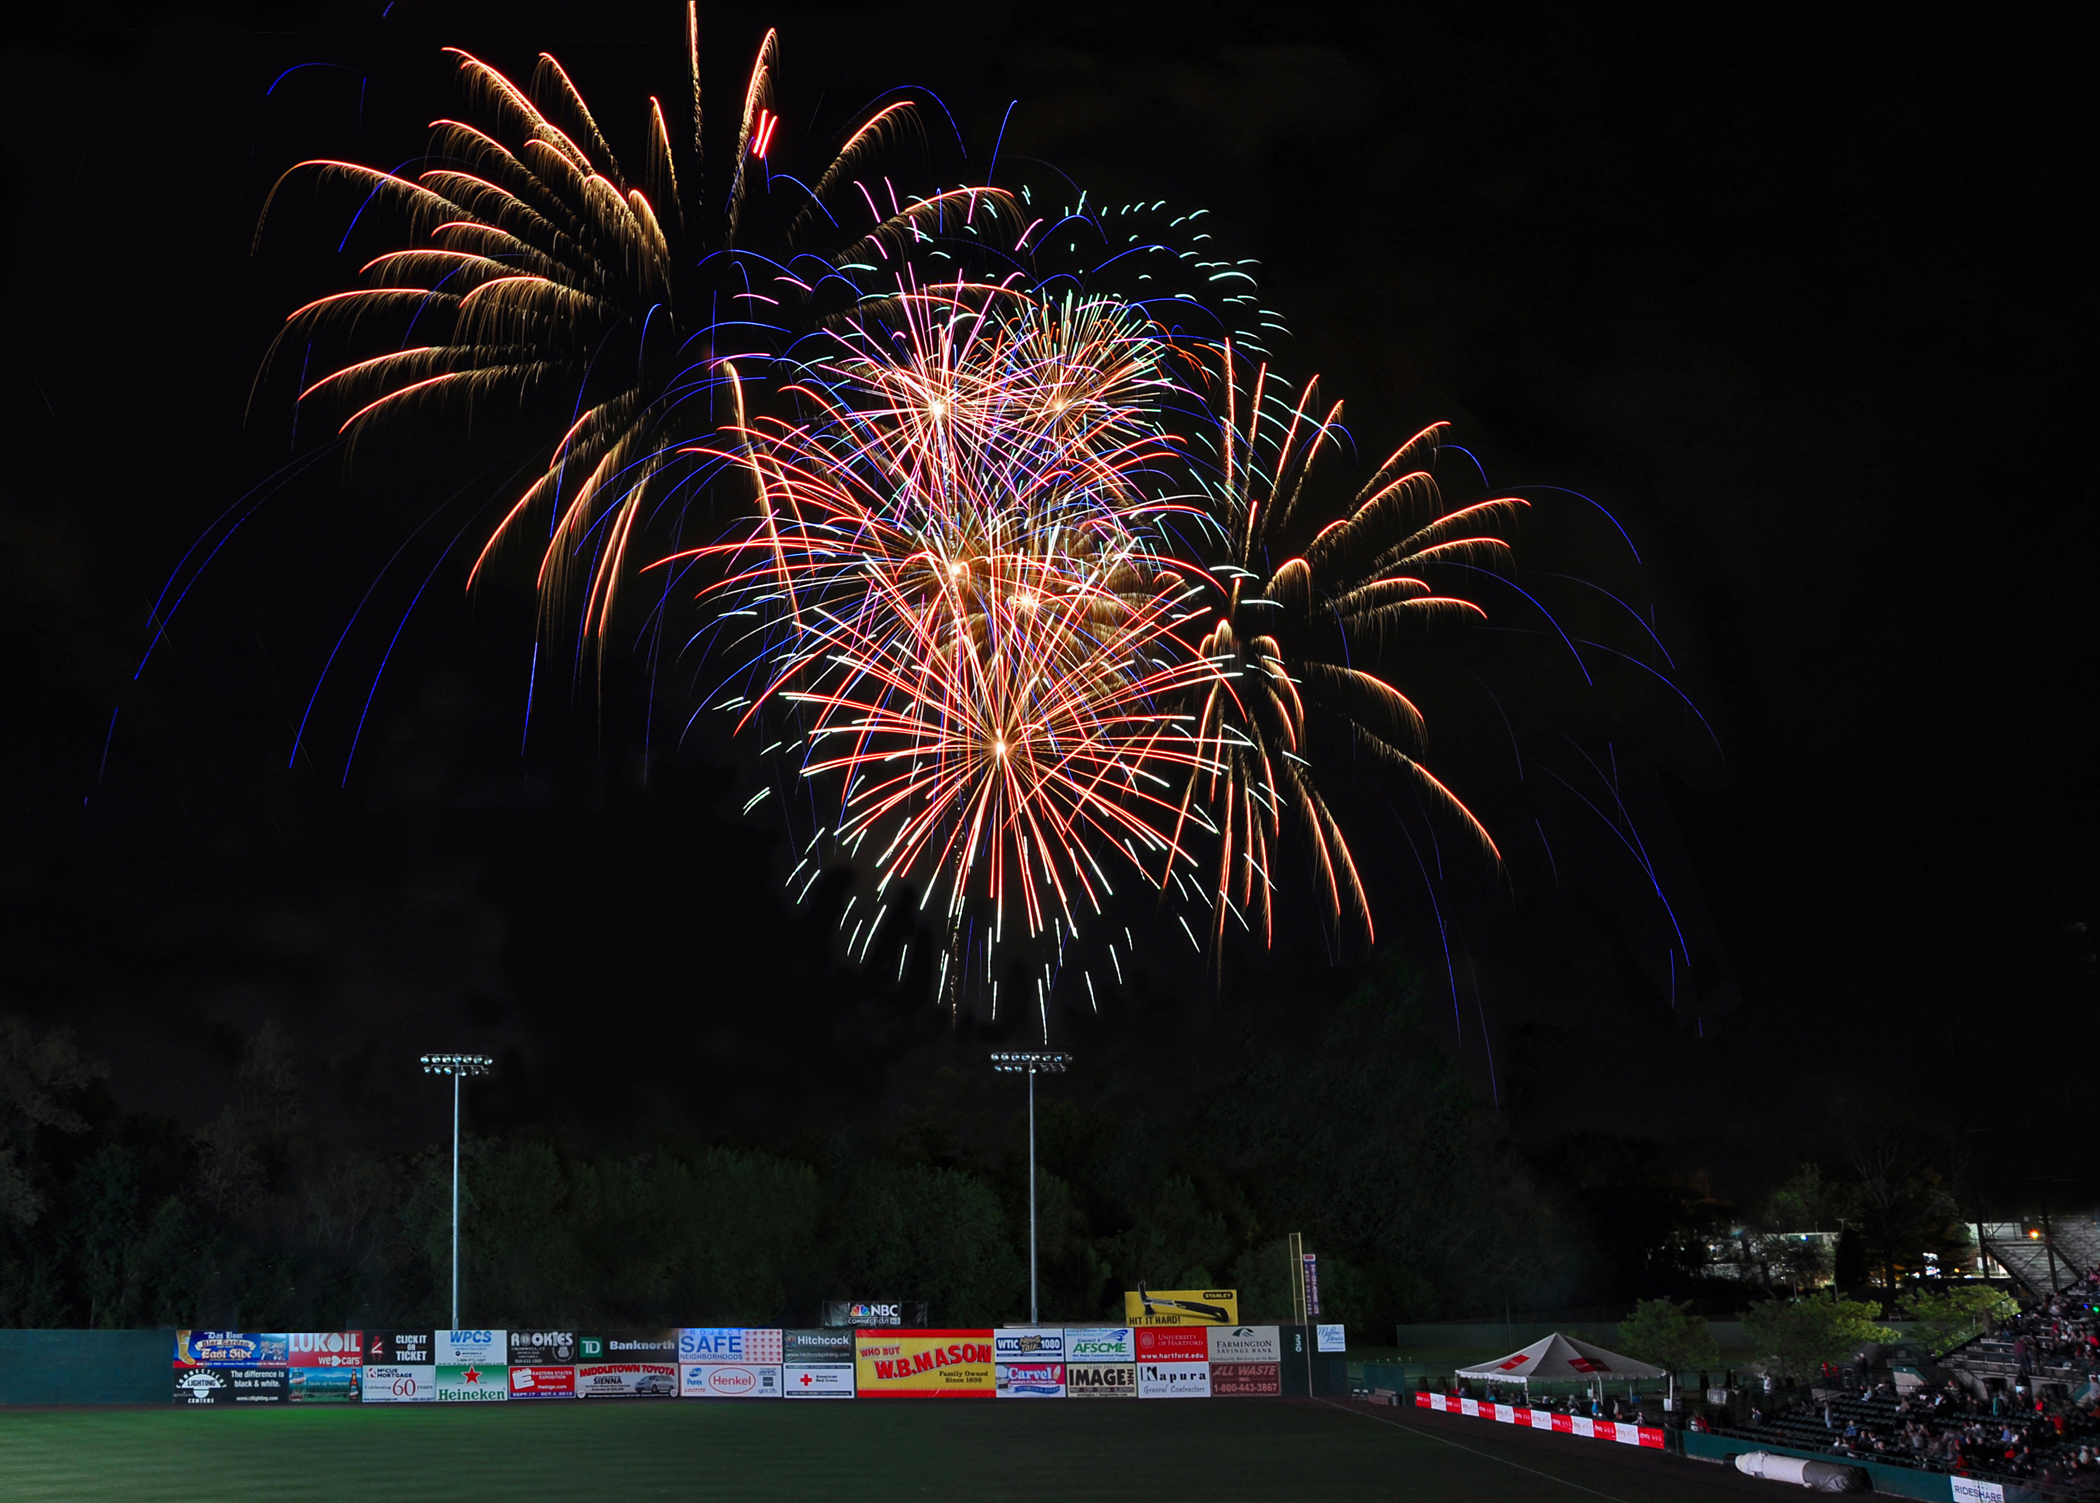 New Britain Rock Cats Fireworks (user submitted)